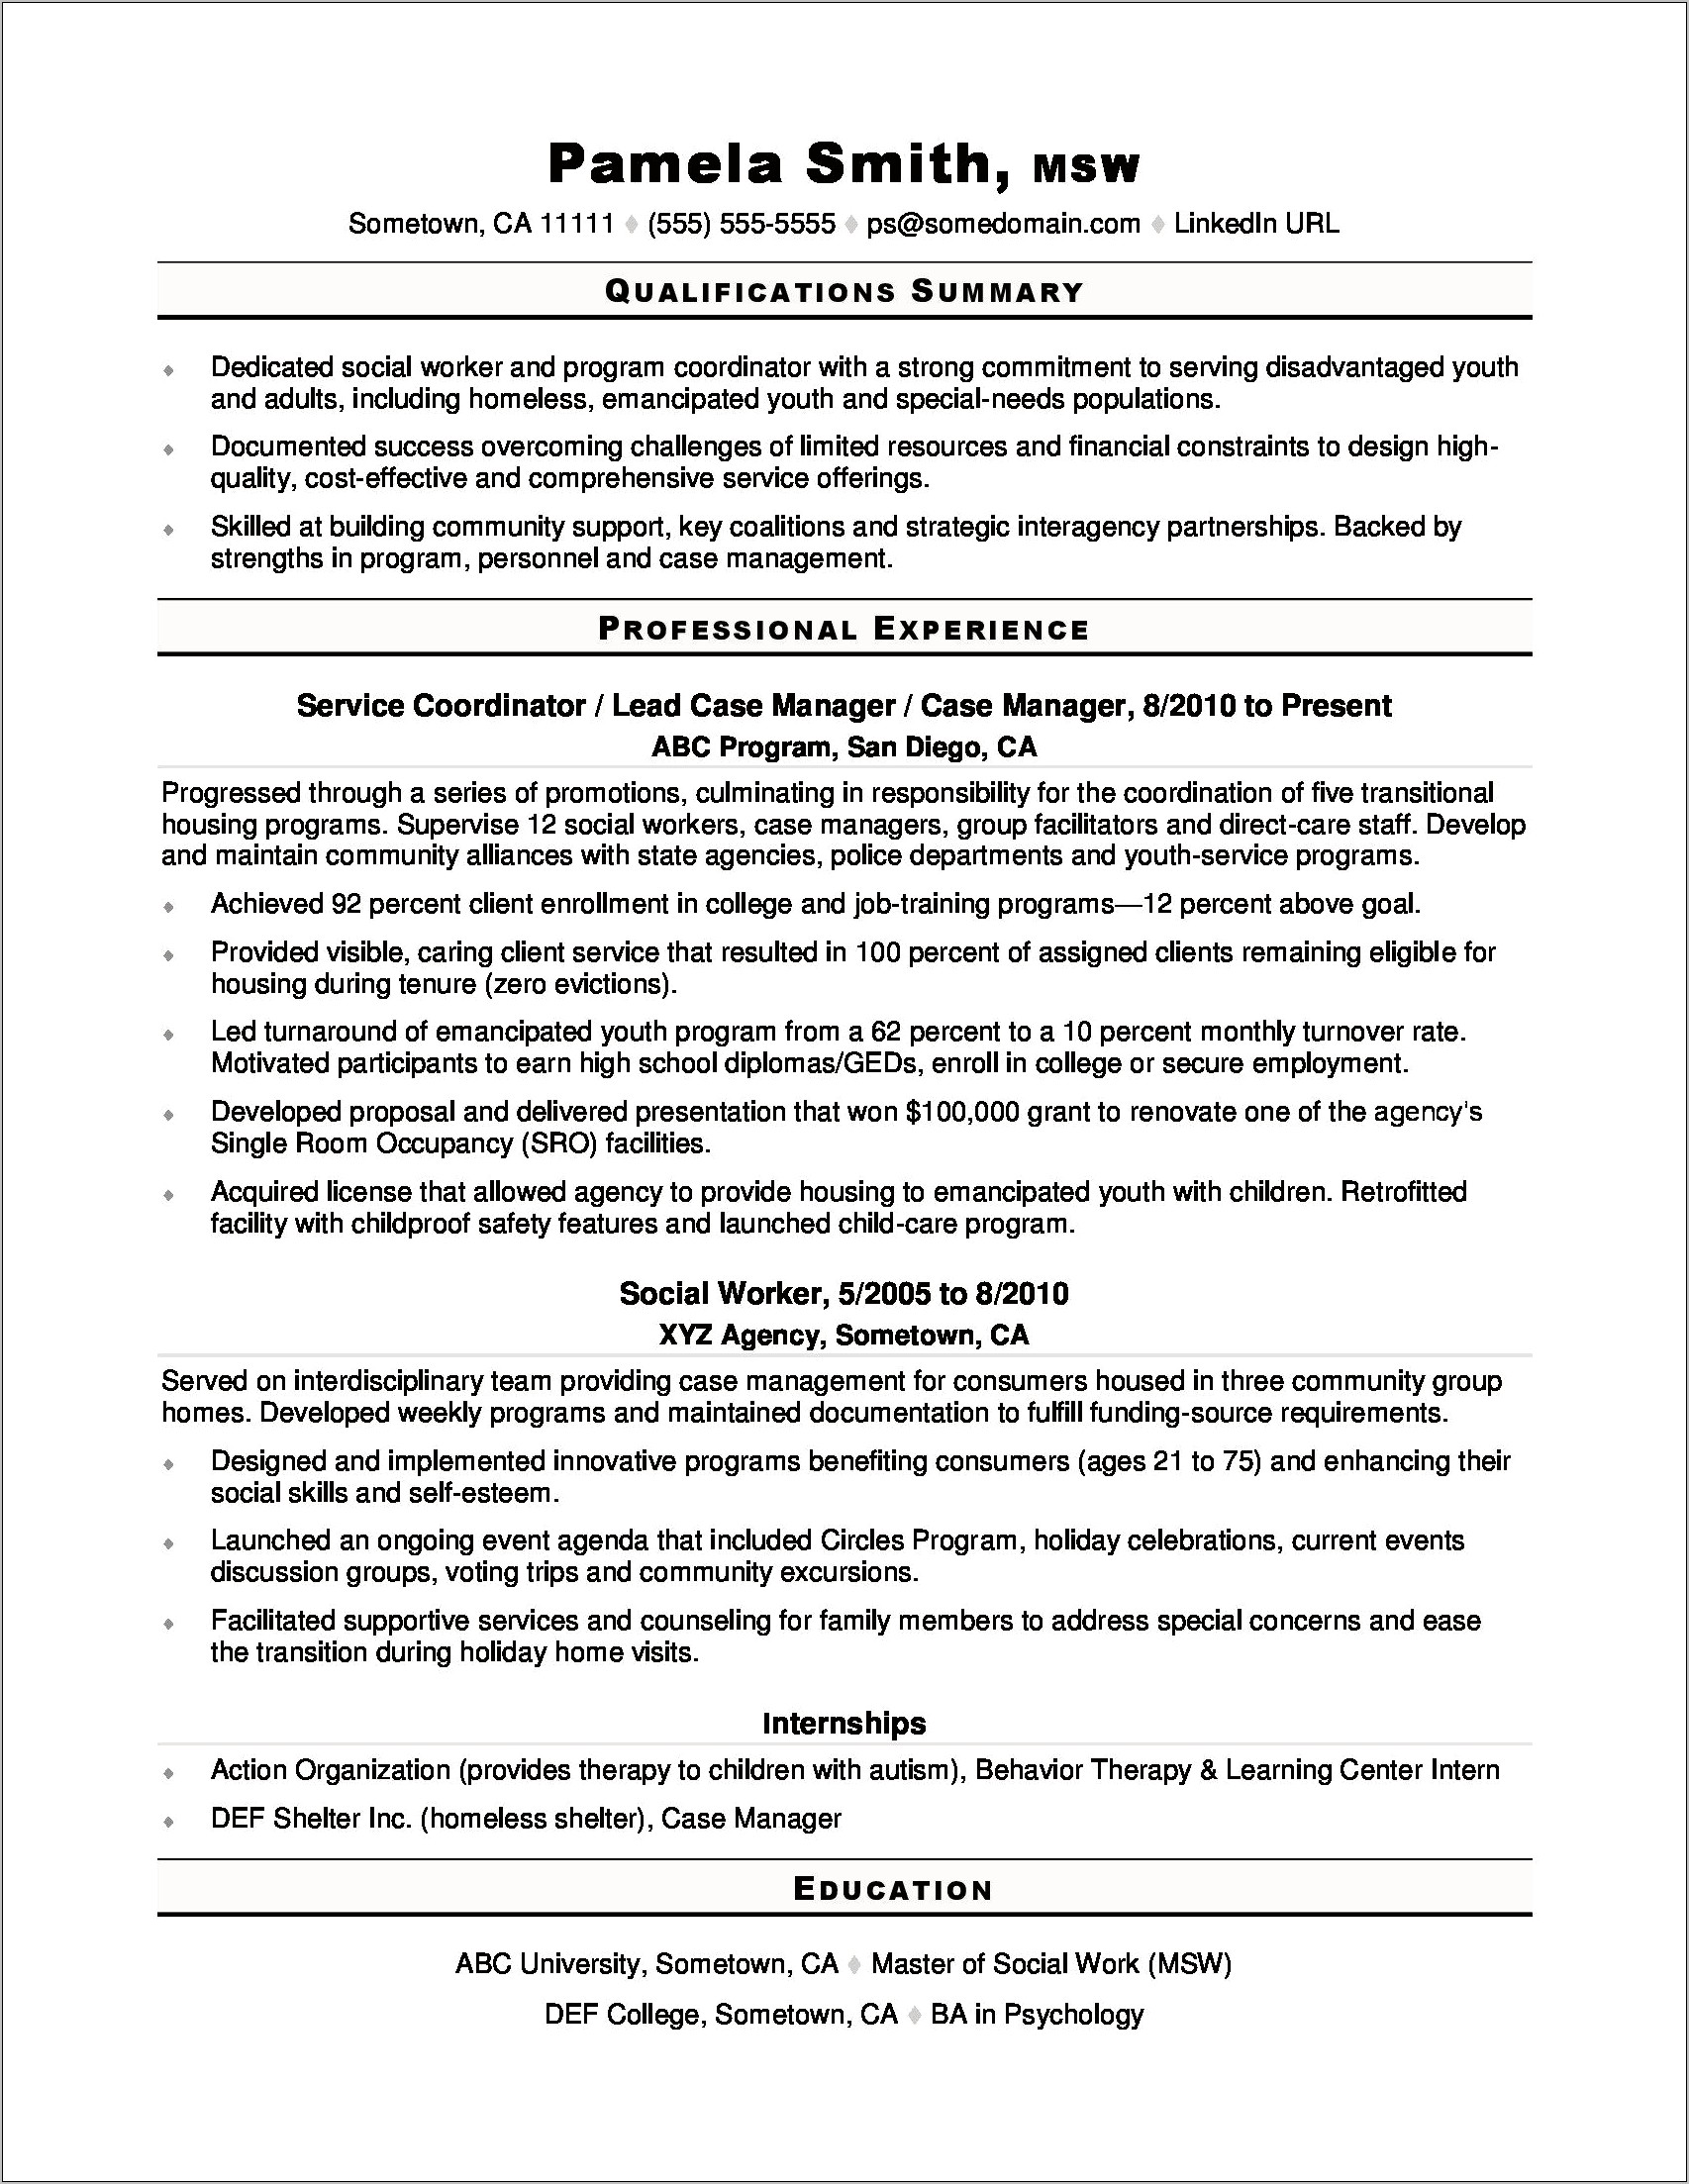 Resume Examples For Social Work Jobs